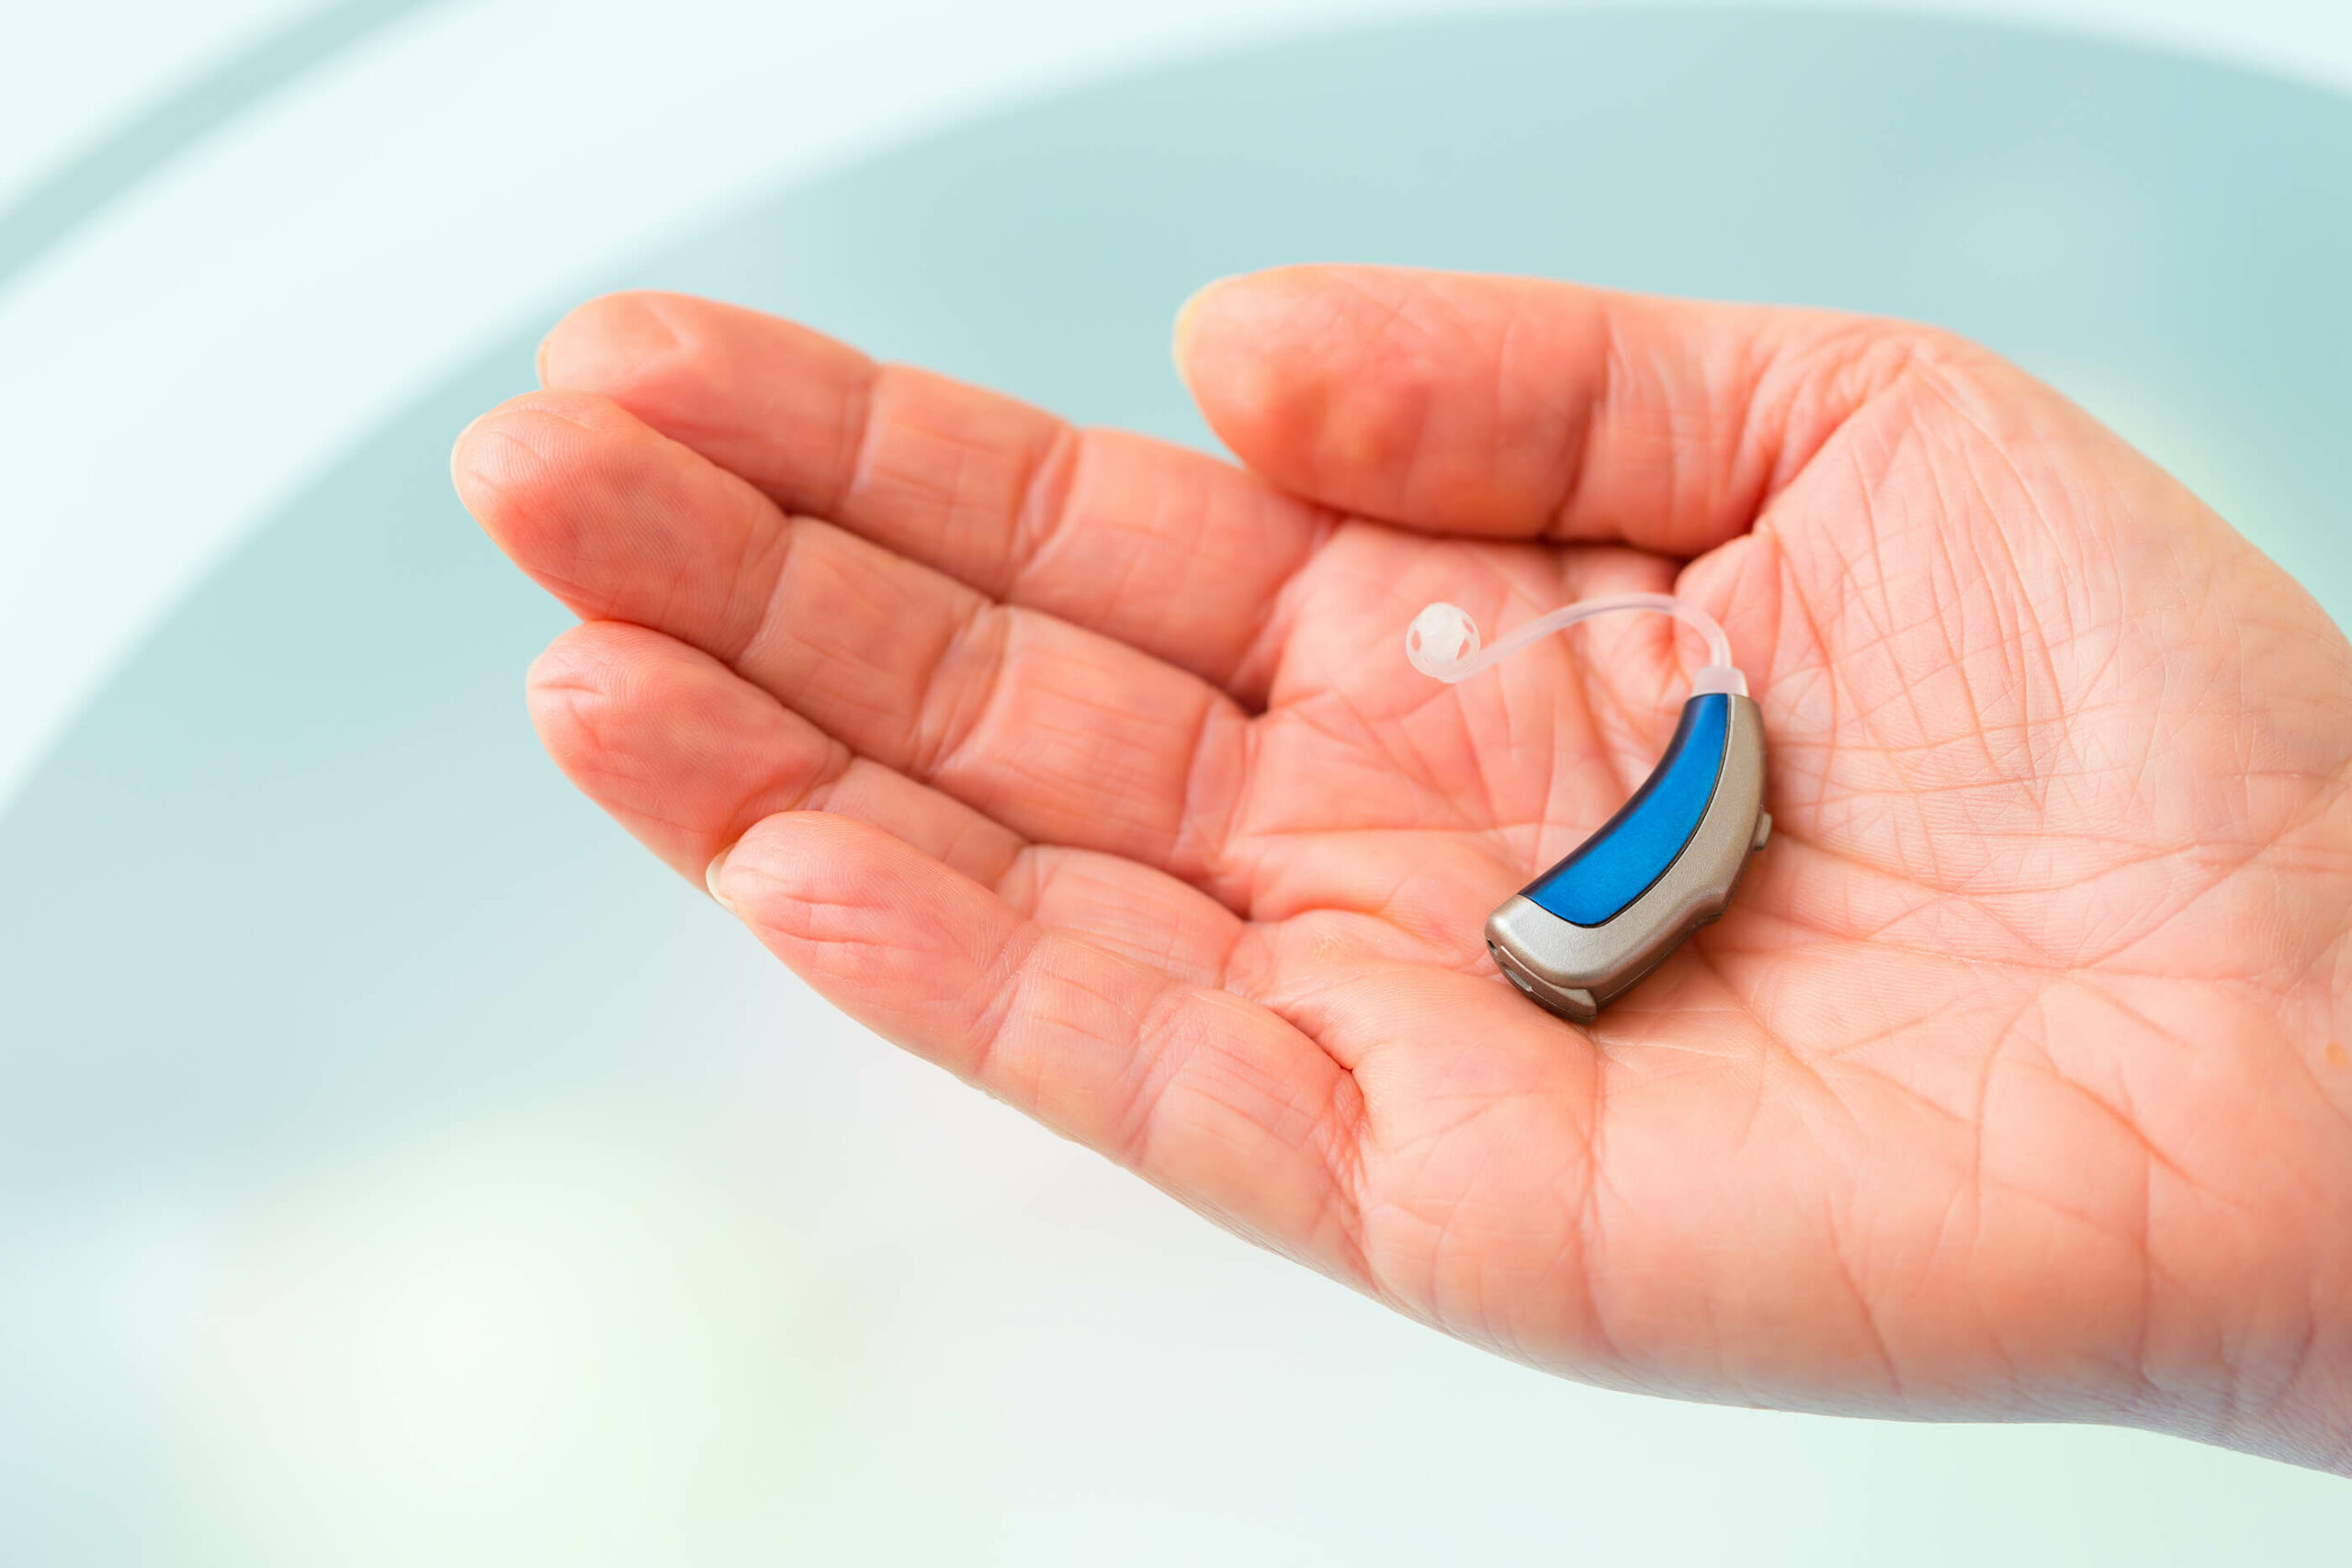 Over-the-Counter Hearing Aids vs. Custom Hearing Aids